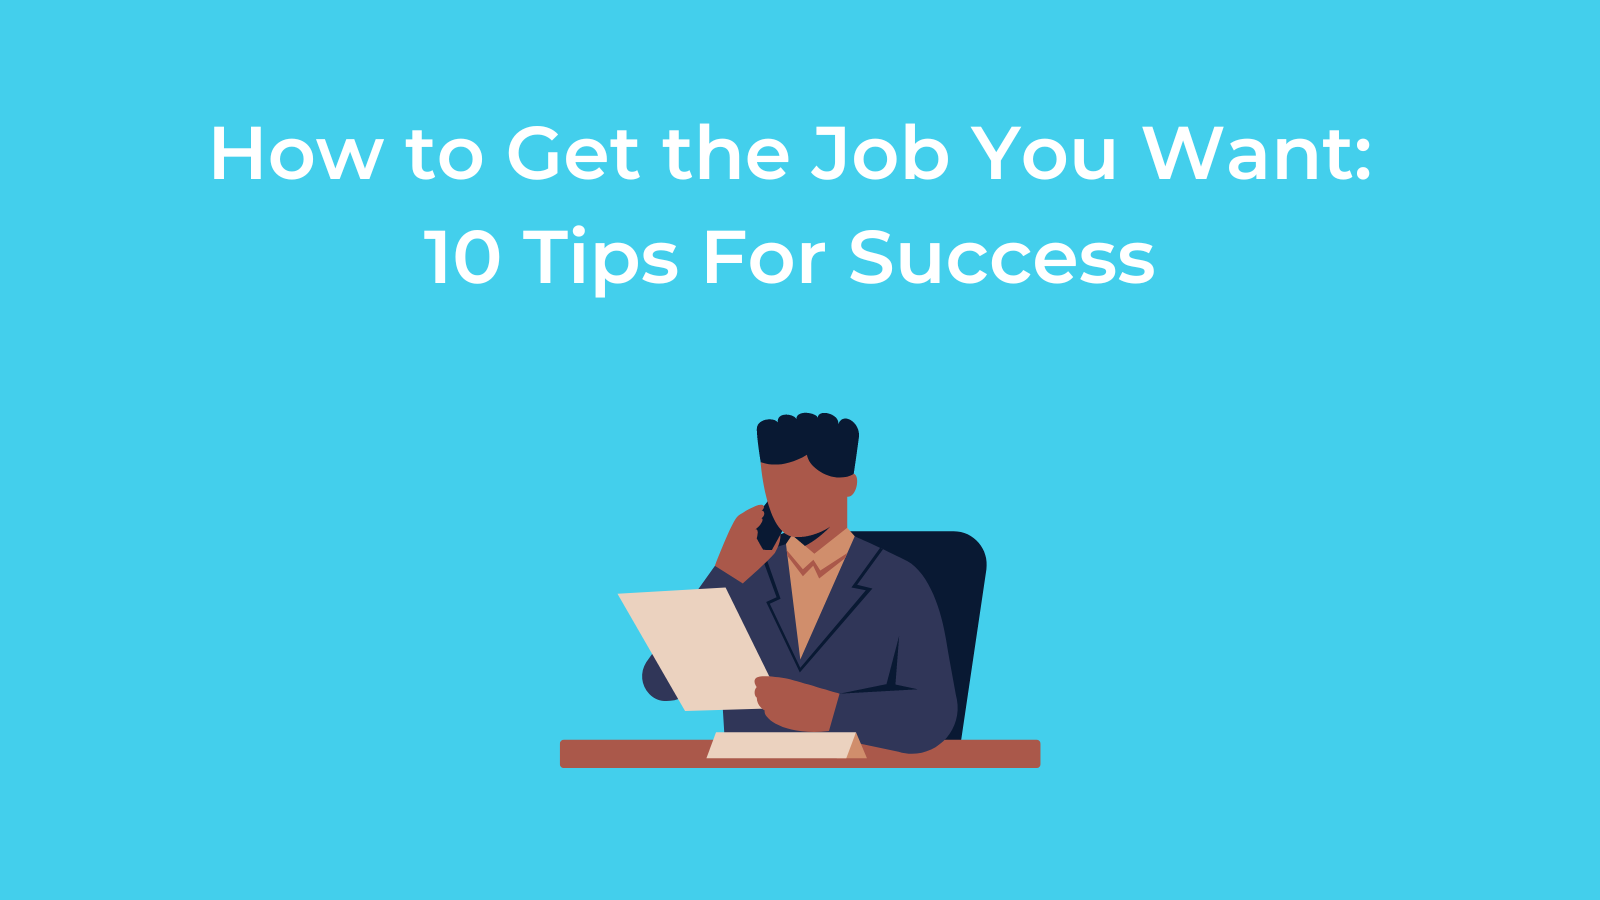 How to Get the Job You Want: 10 Tips For Success